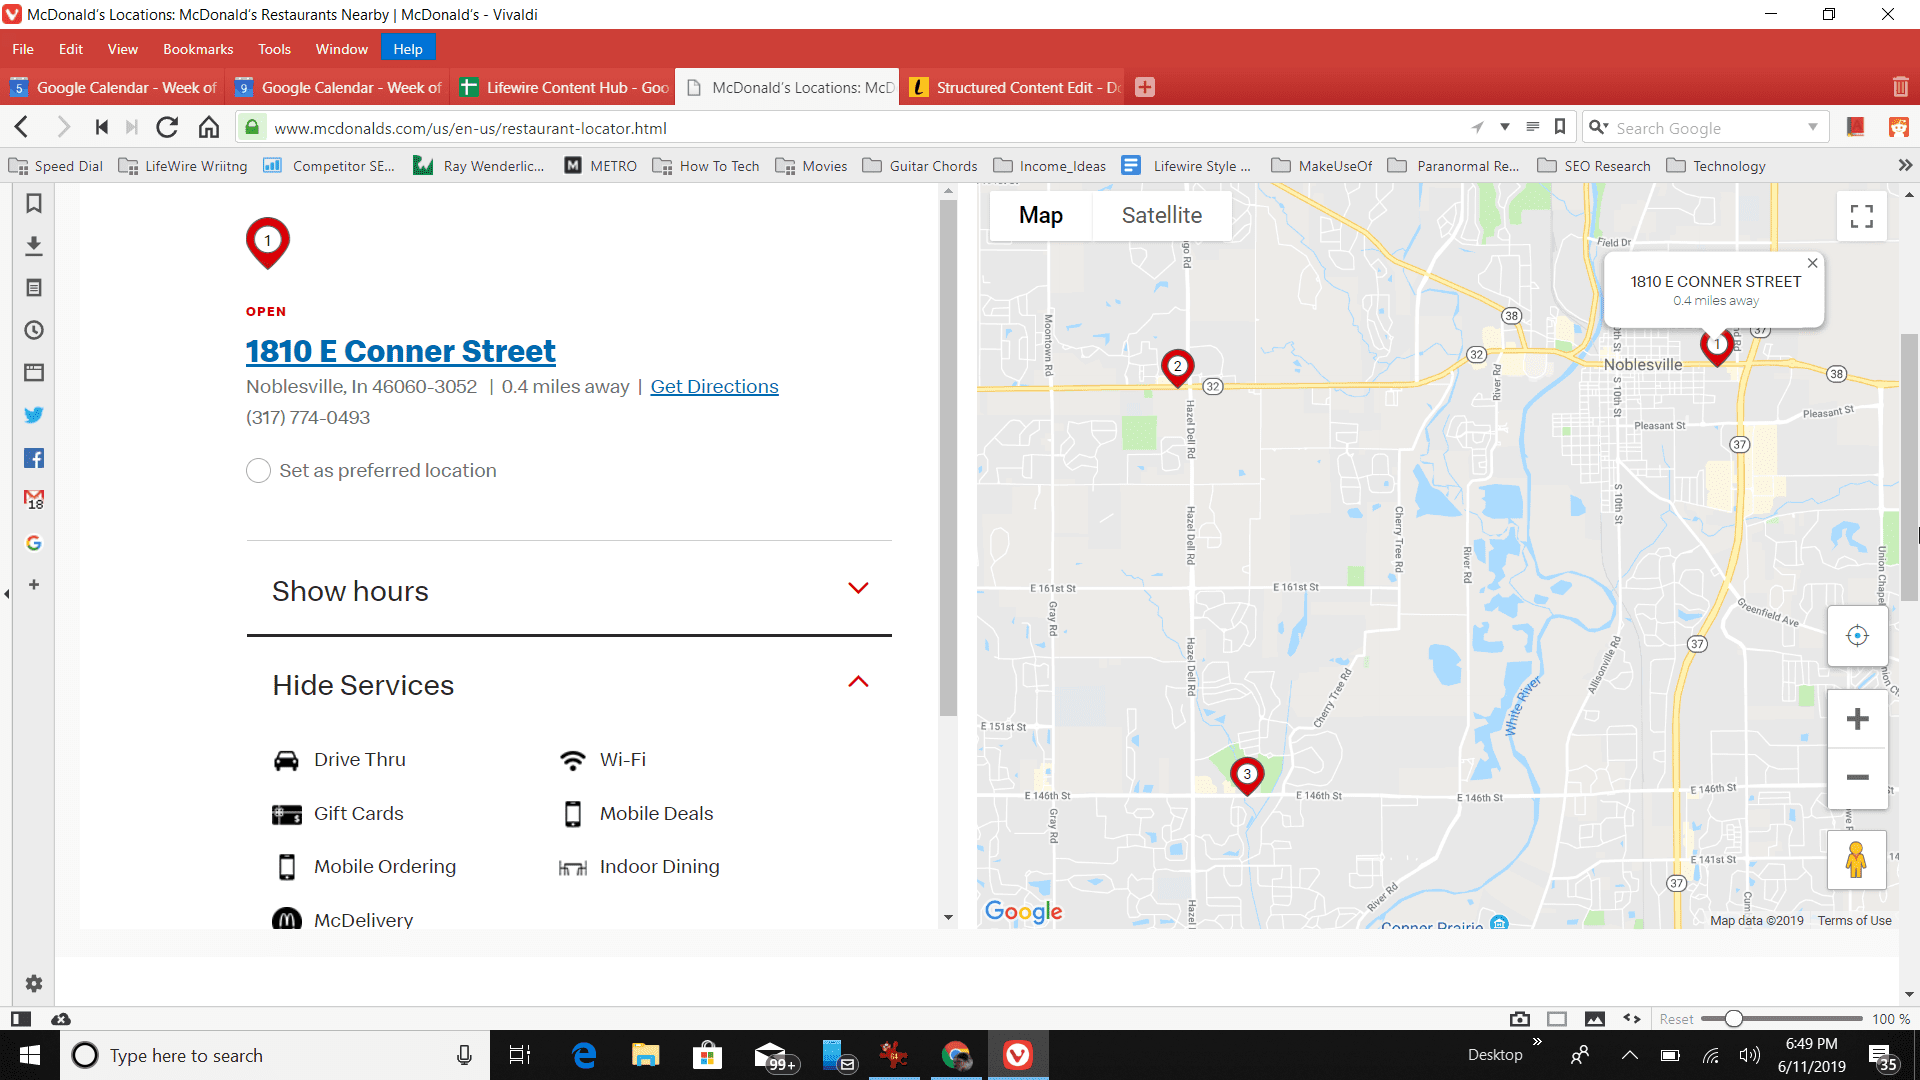 McDonald's location results with Wi-Fi